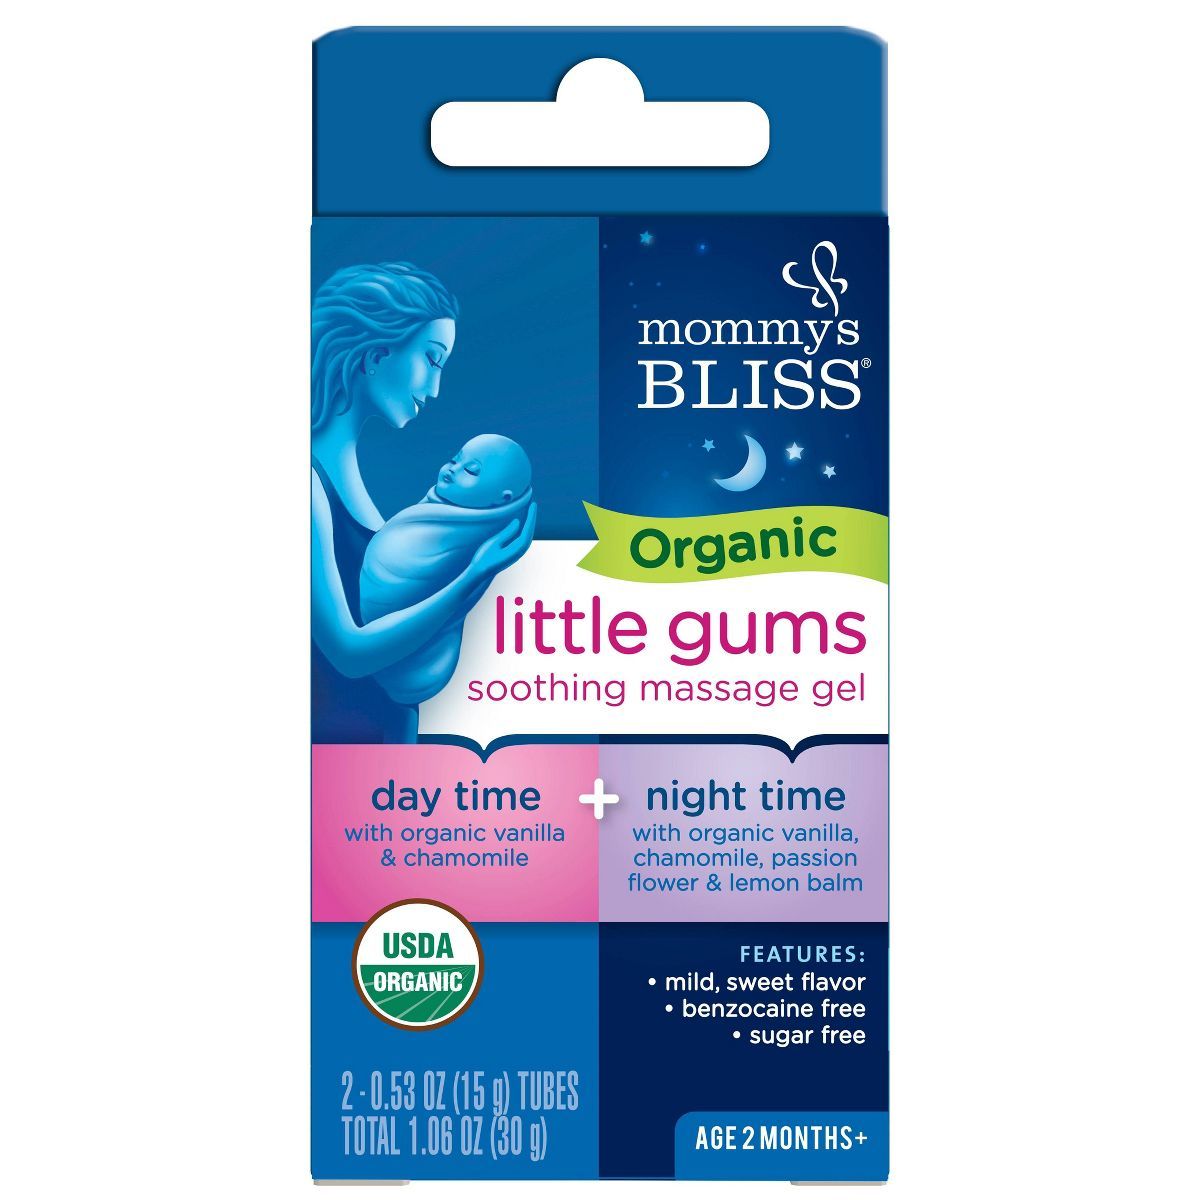 Mommy's Bliss Organic Little Gums Soothing Massage Gel Day & Night Combo - 2ct/1.06oz | Target